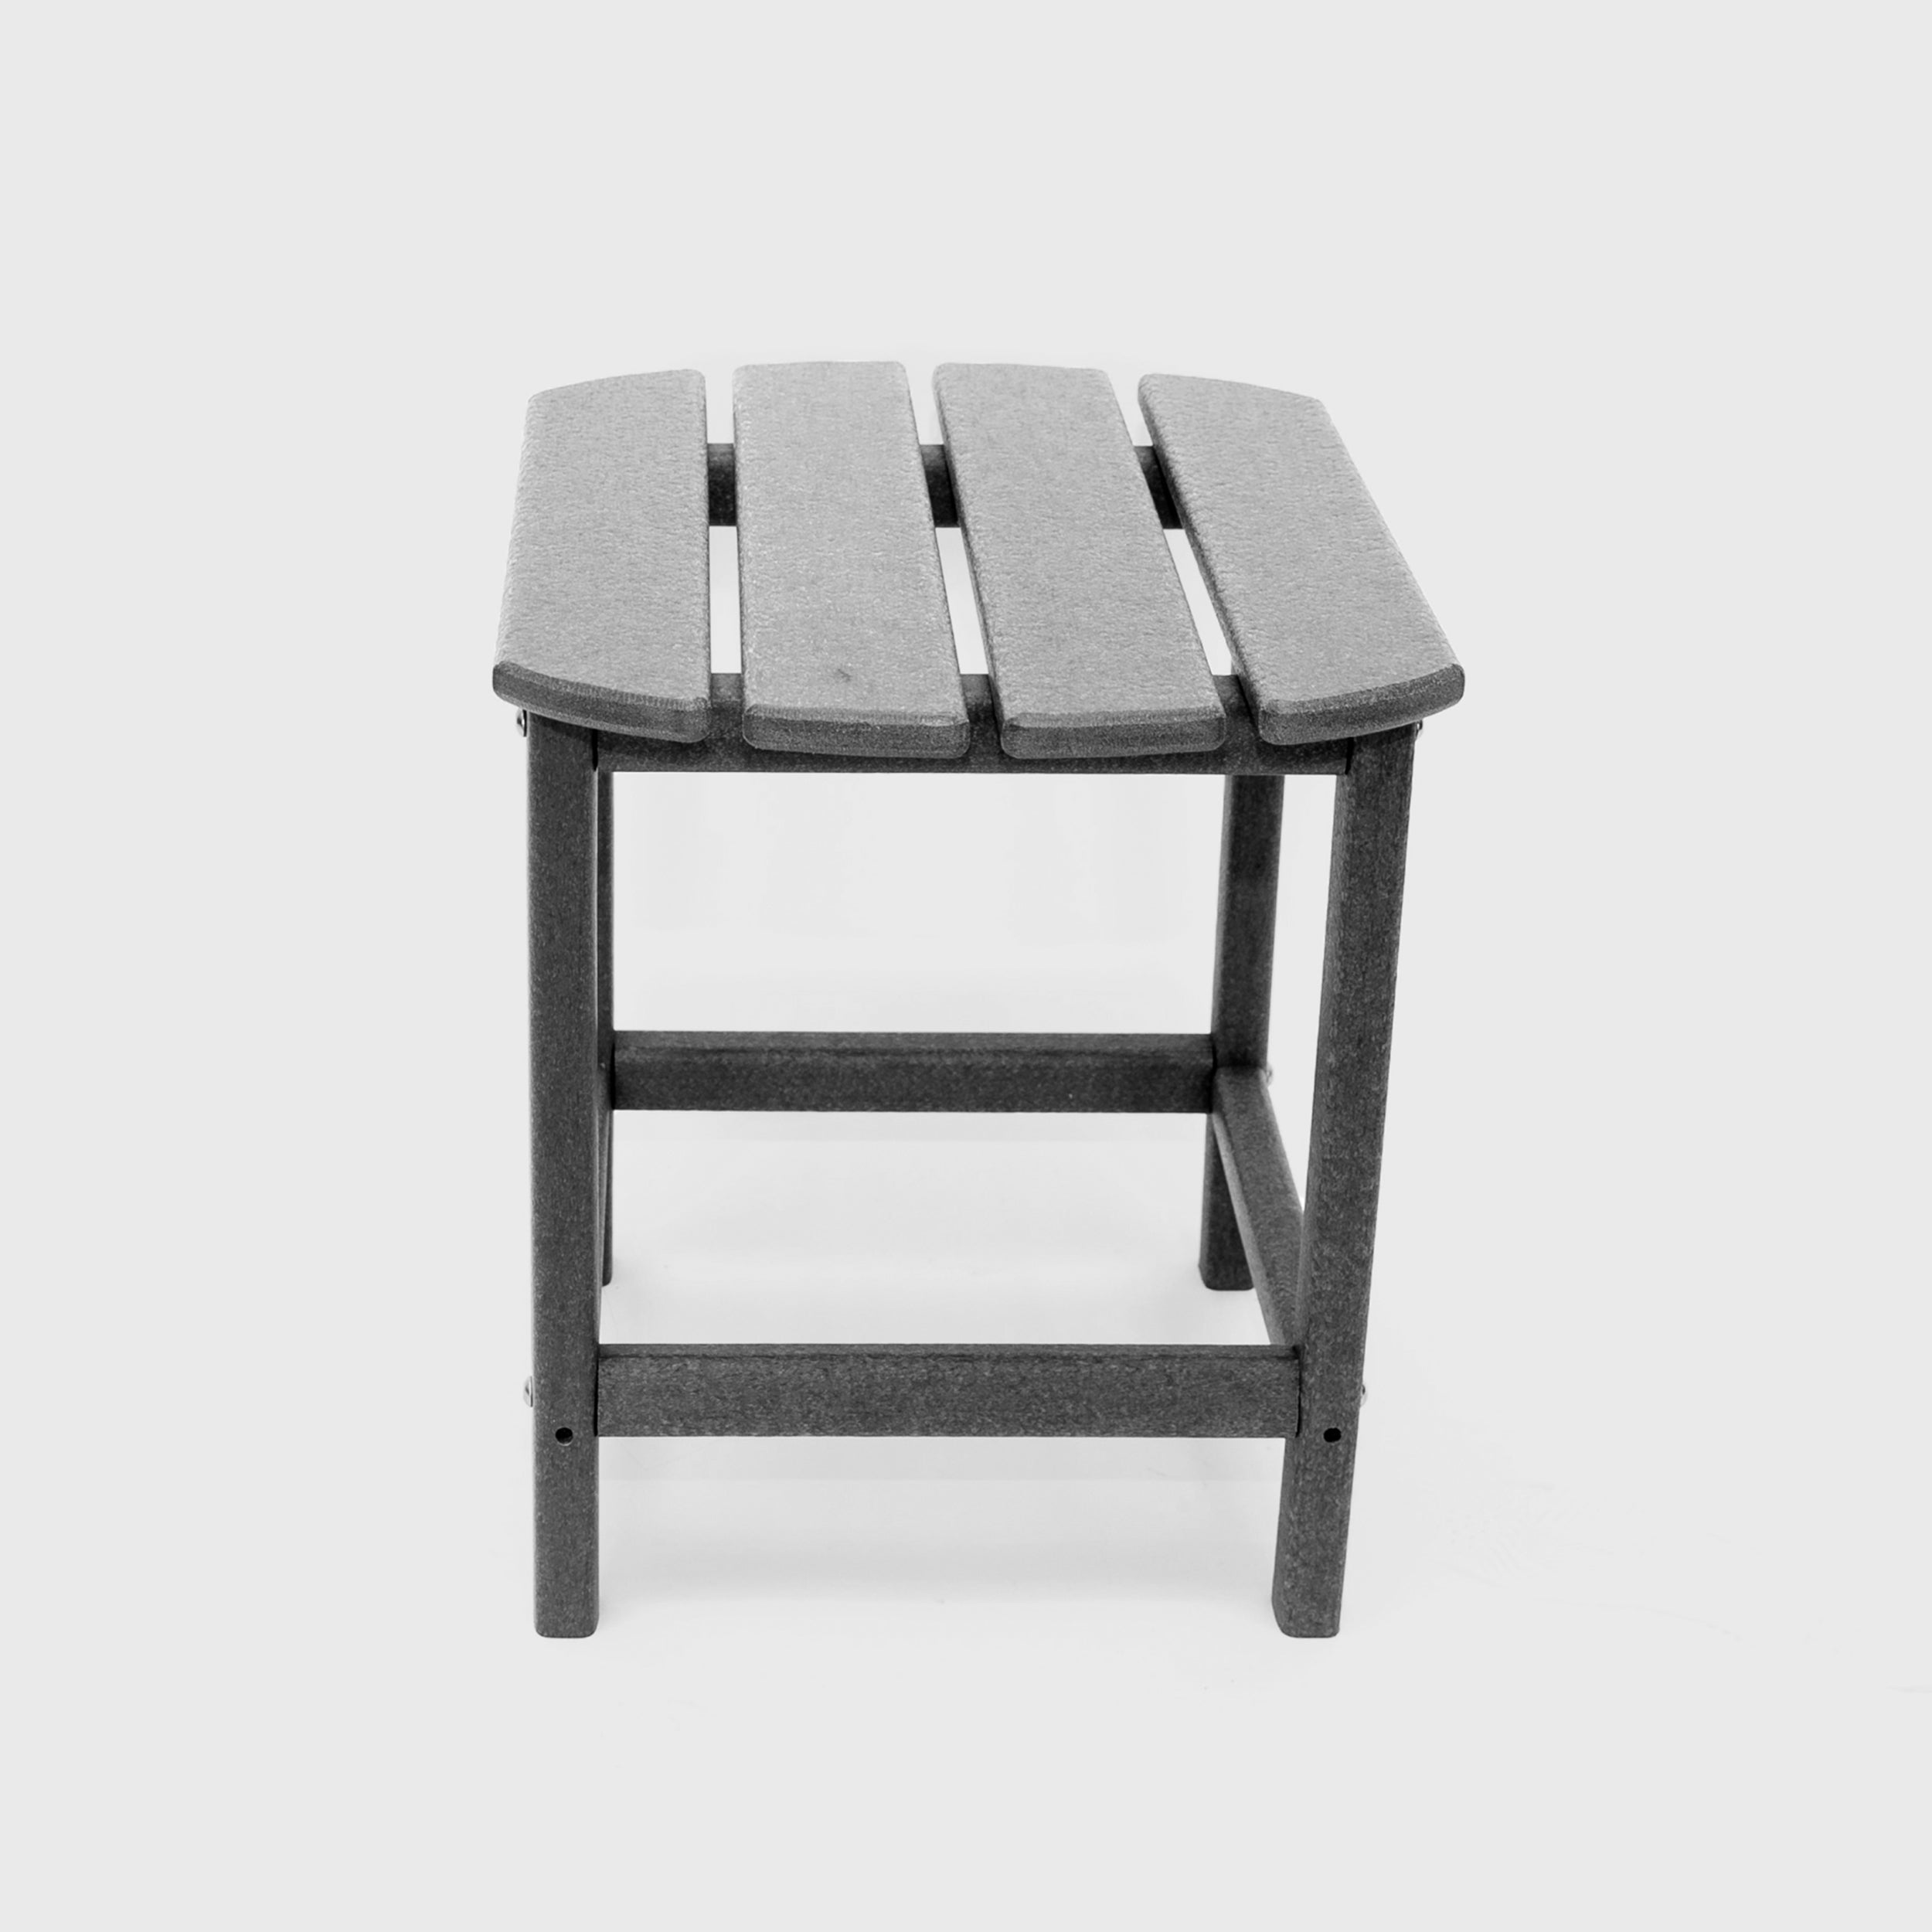 HDPE Recycled Plastic Side Table